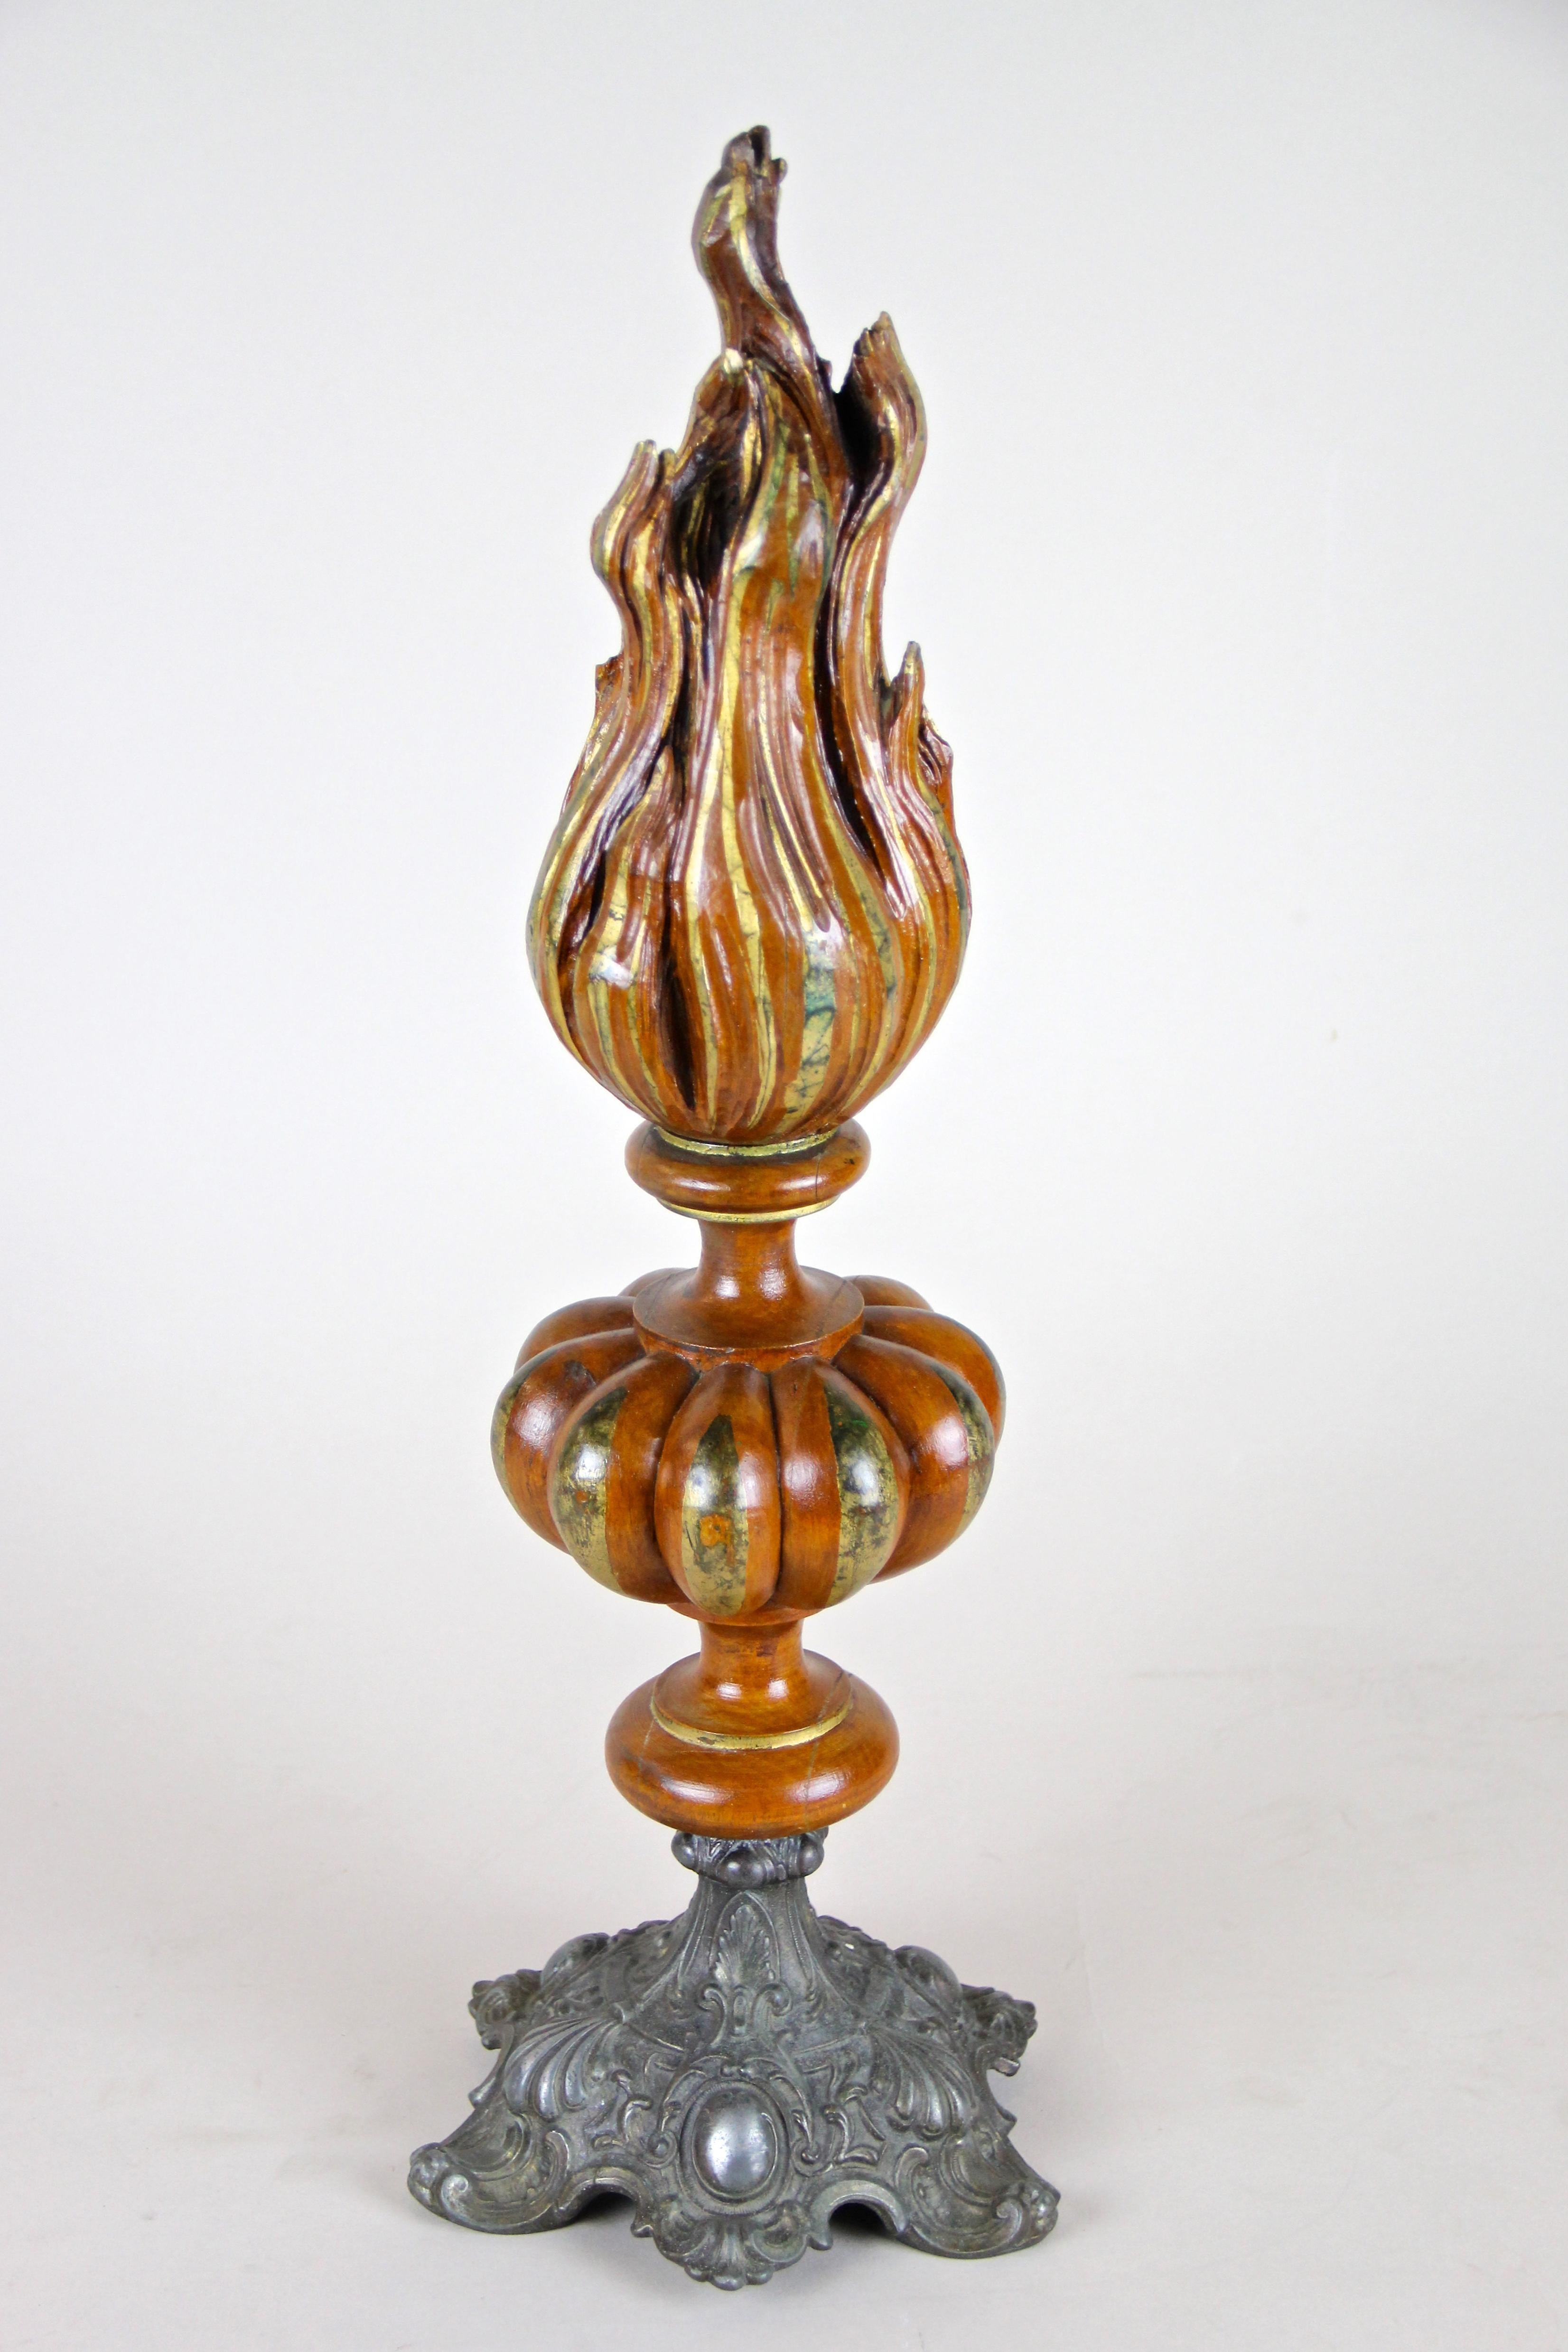 Unique hand carved wooden torch sculpture with flame from Austria, circa 1880. This unique highly decorative piece was artfully carved out of bass wood and shows a fantastic coloration in light brown and gold. A fantastic sculpture based on a lovely